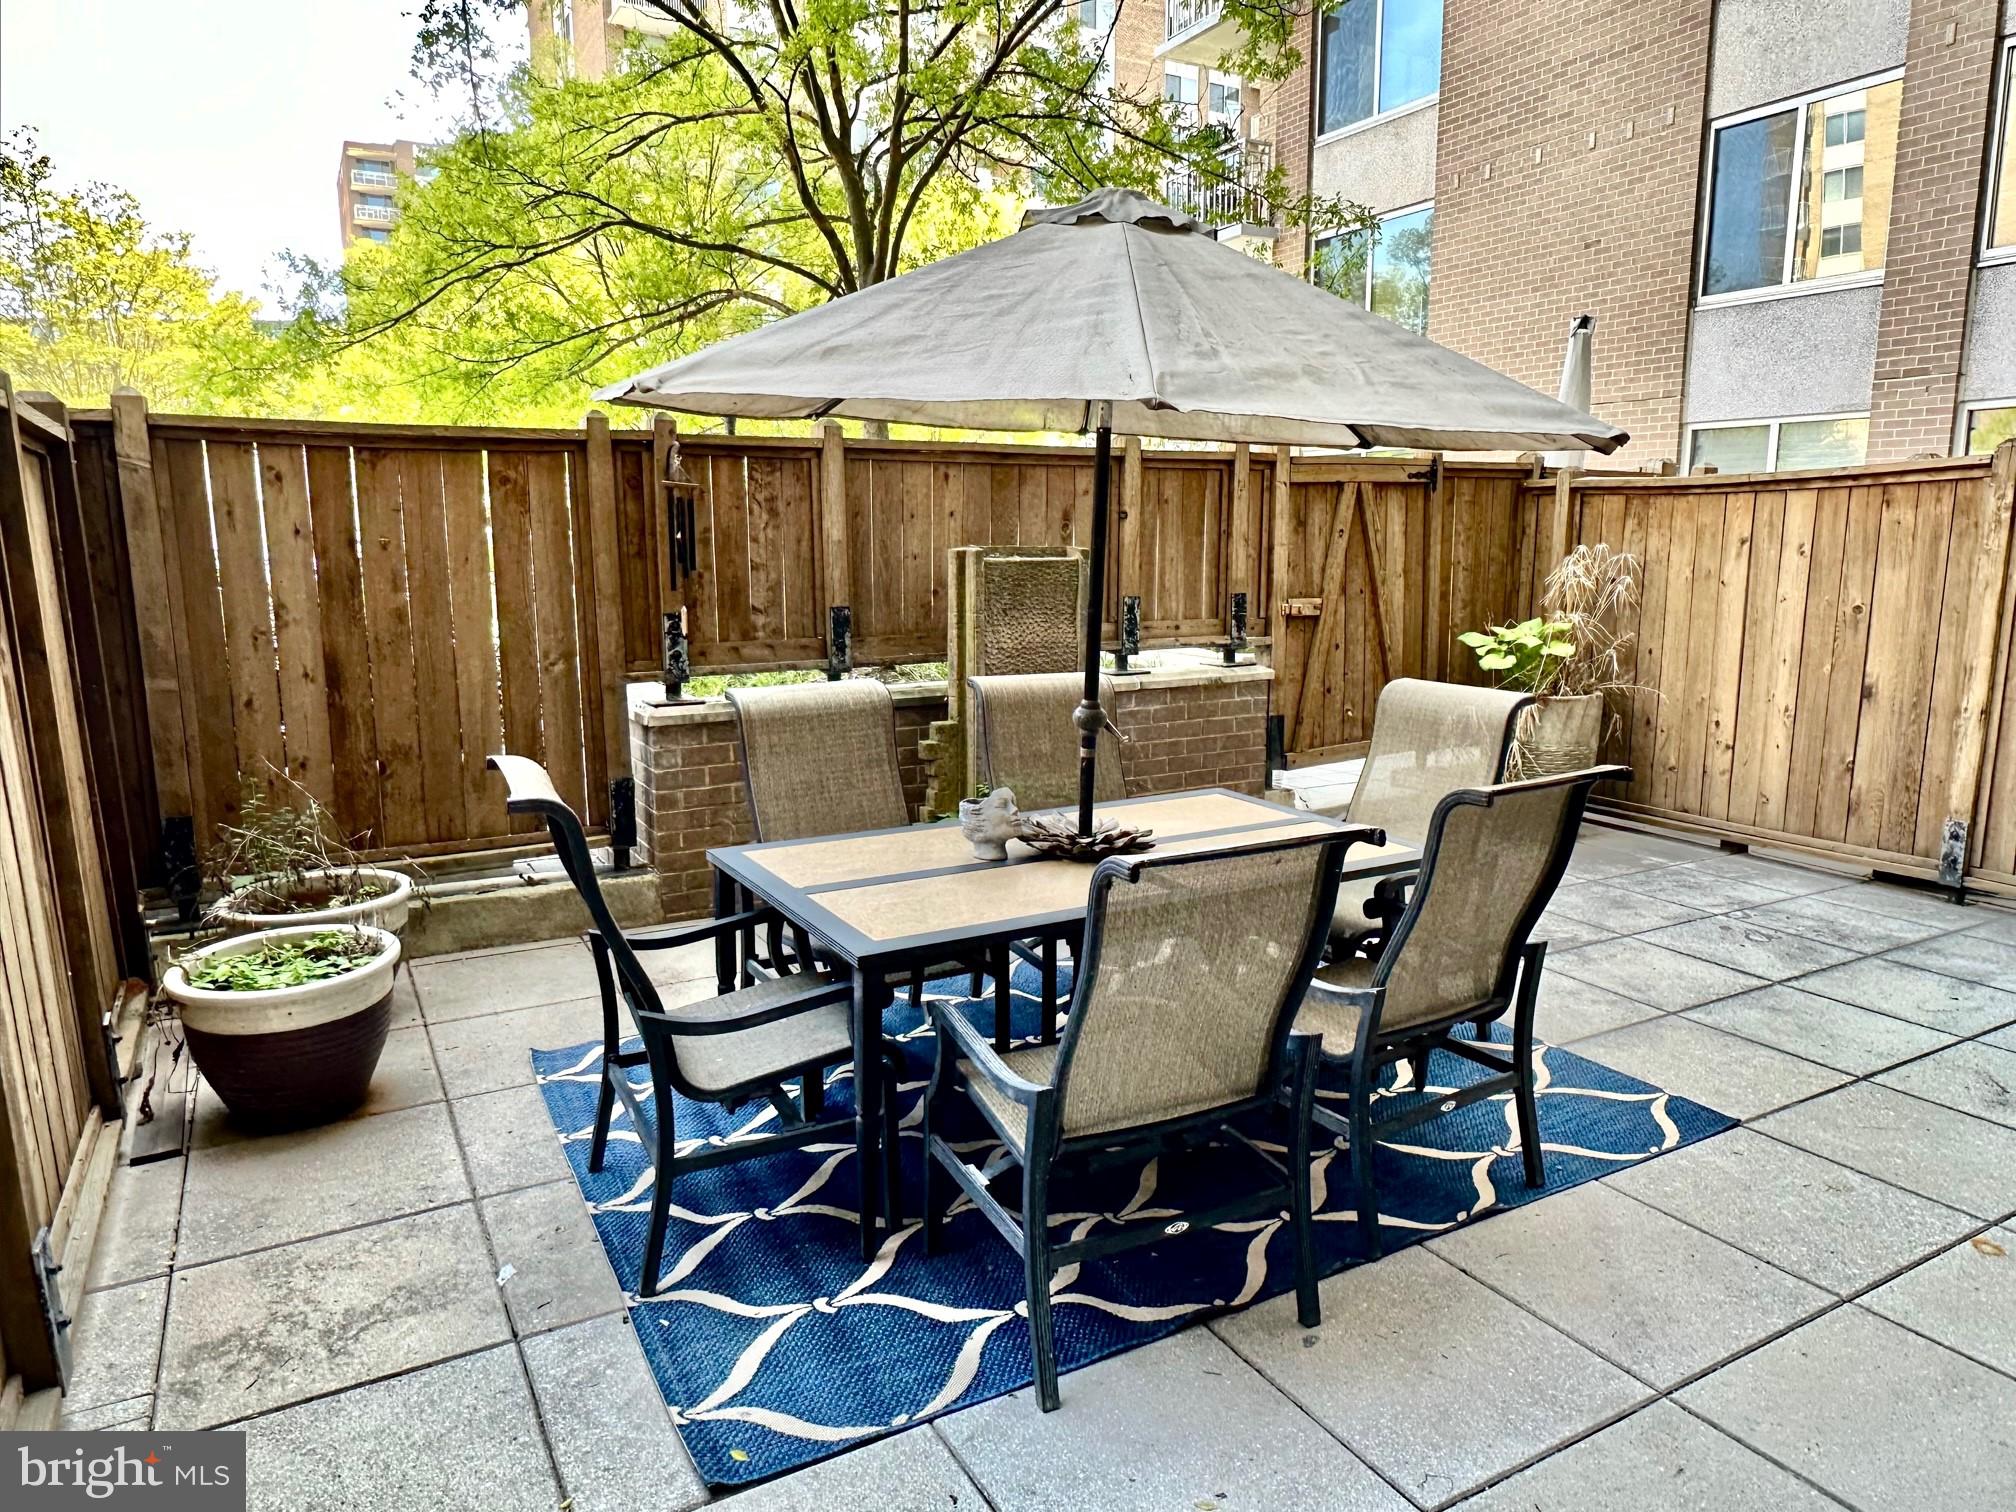 a view of a dinning table and chairs in the patio